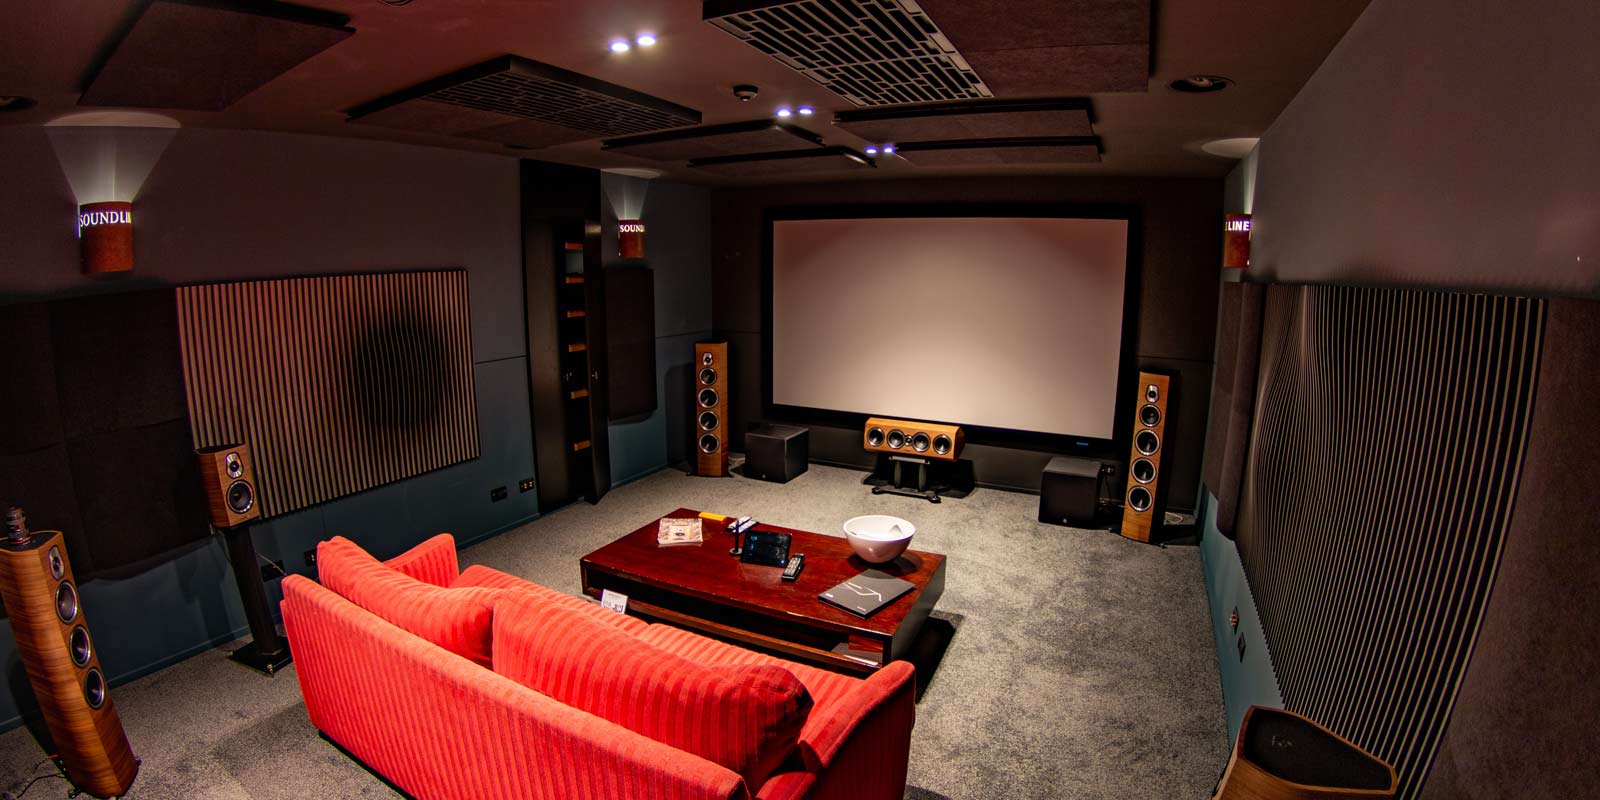 Acoustic-wall-and-ceiling-treatments-soundline-christchurch